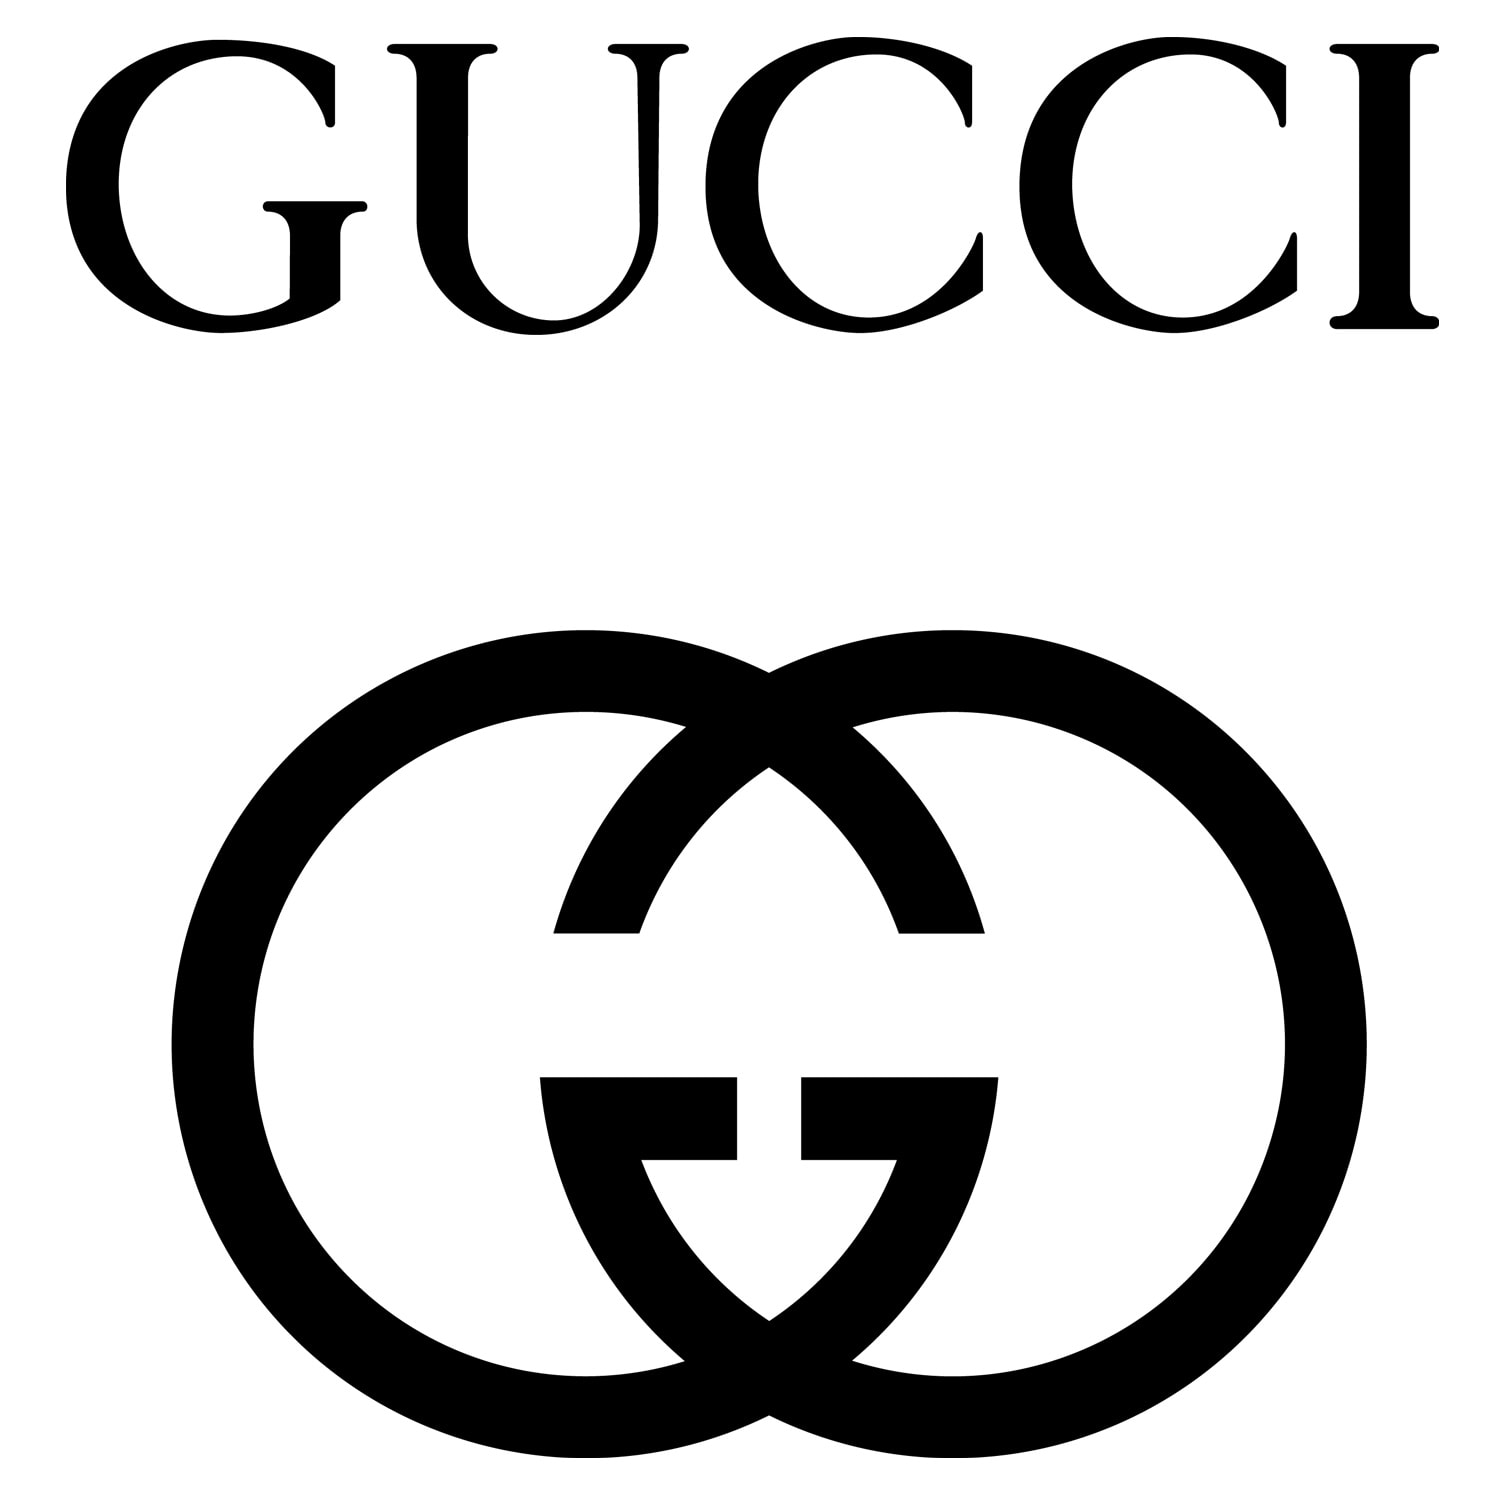 Gucci's interlocking G logo, which are the initials of Guccio Gucci, has become synonymous with luxury and sophistication